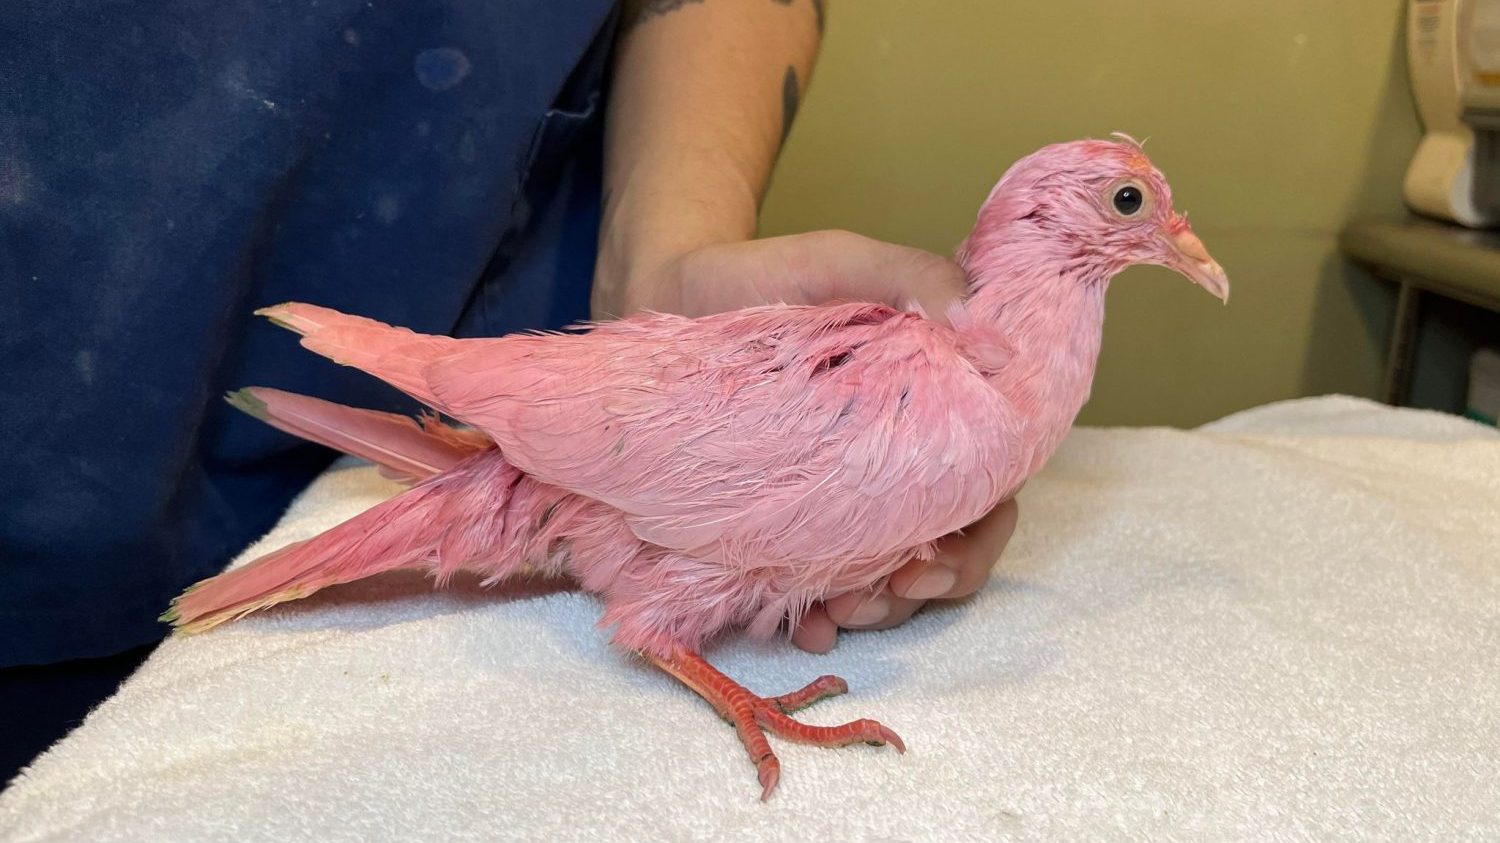 A domestic pigeon that has been dyed pink with hair dye.